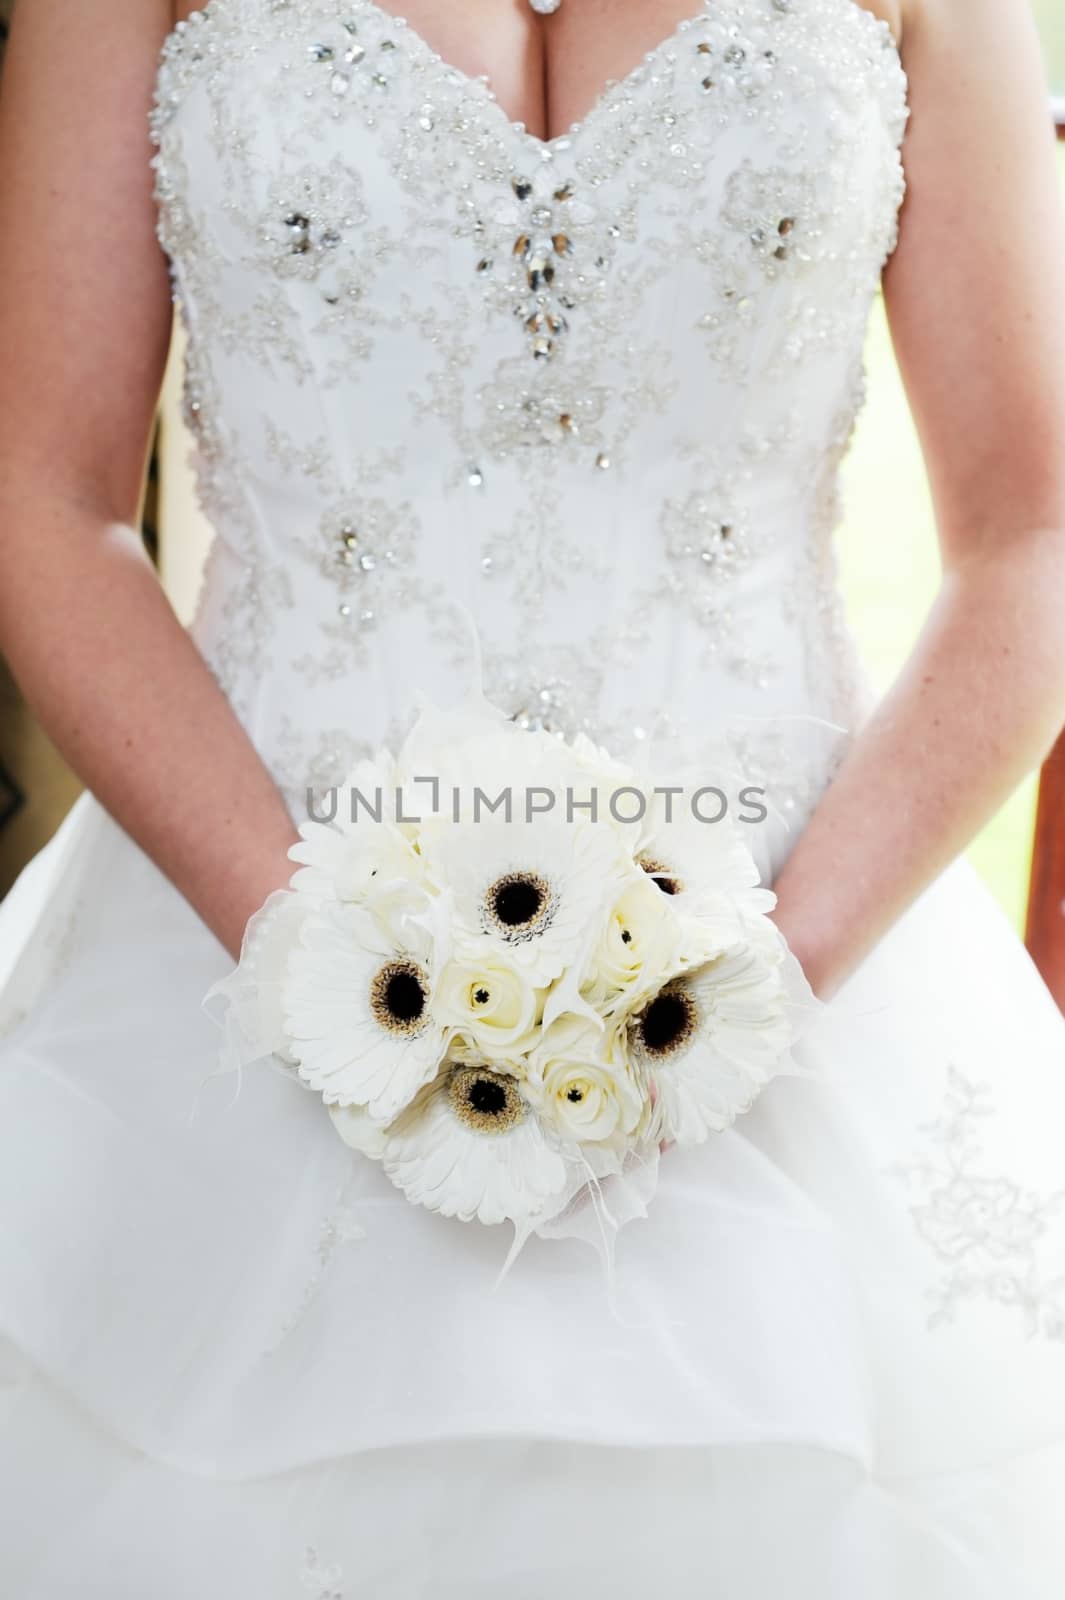 Brides bouquet and dress details by kmwphotography